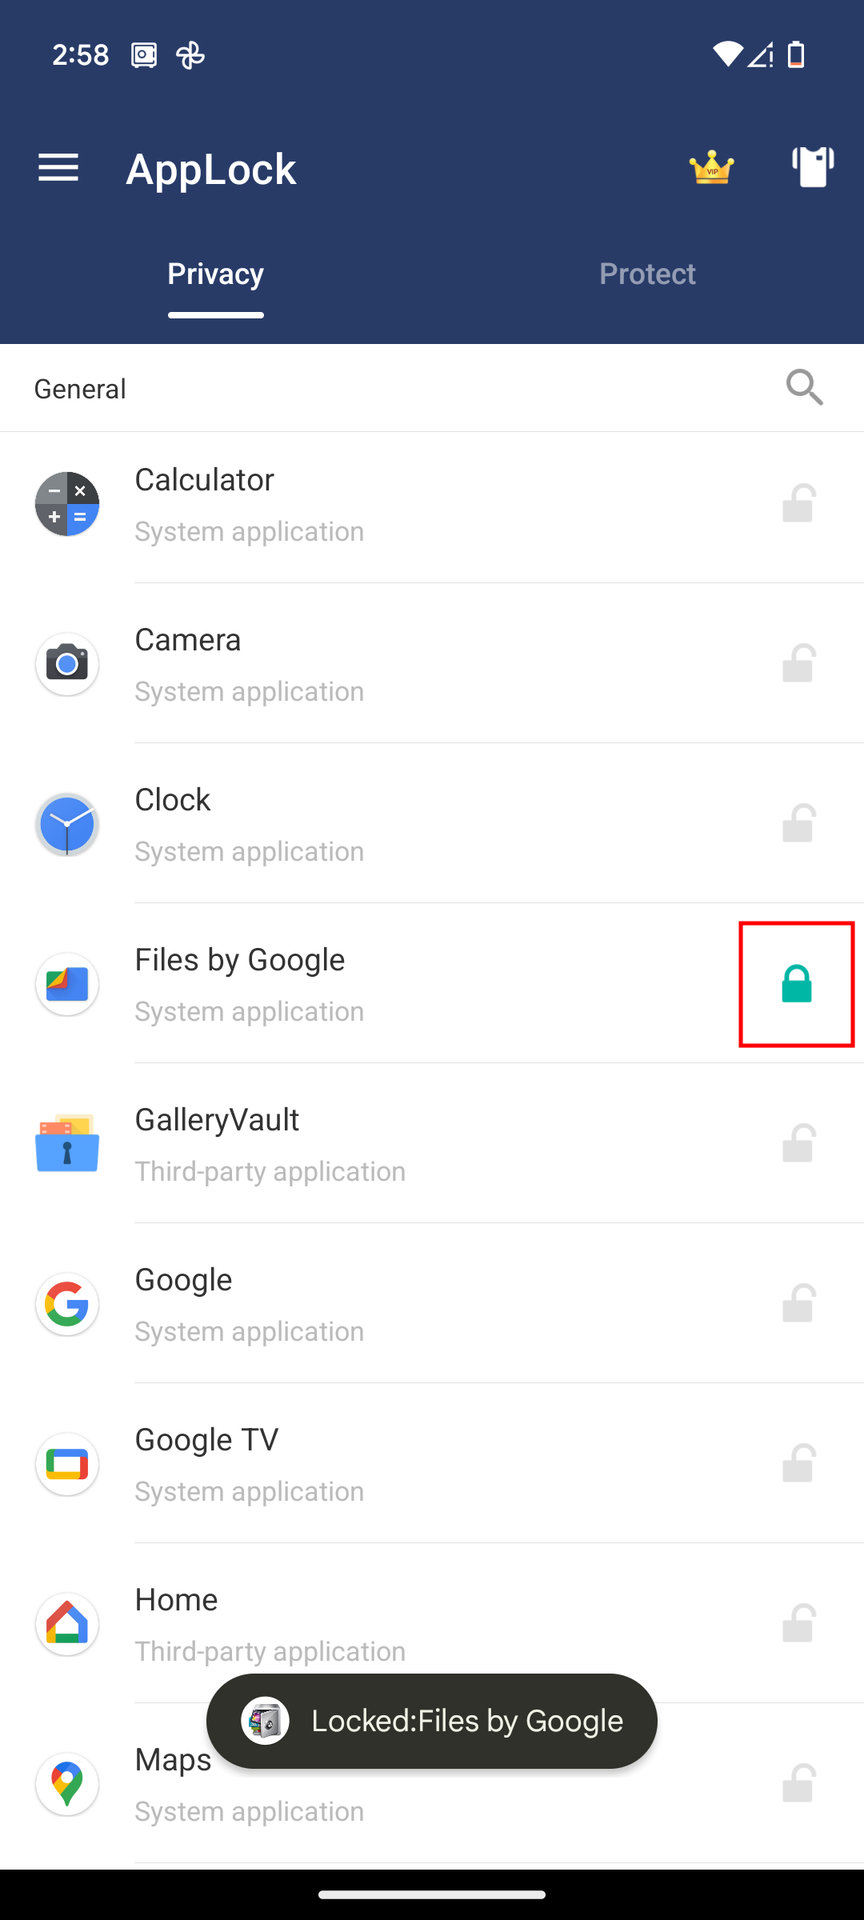 How to use AppLock (3)